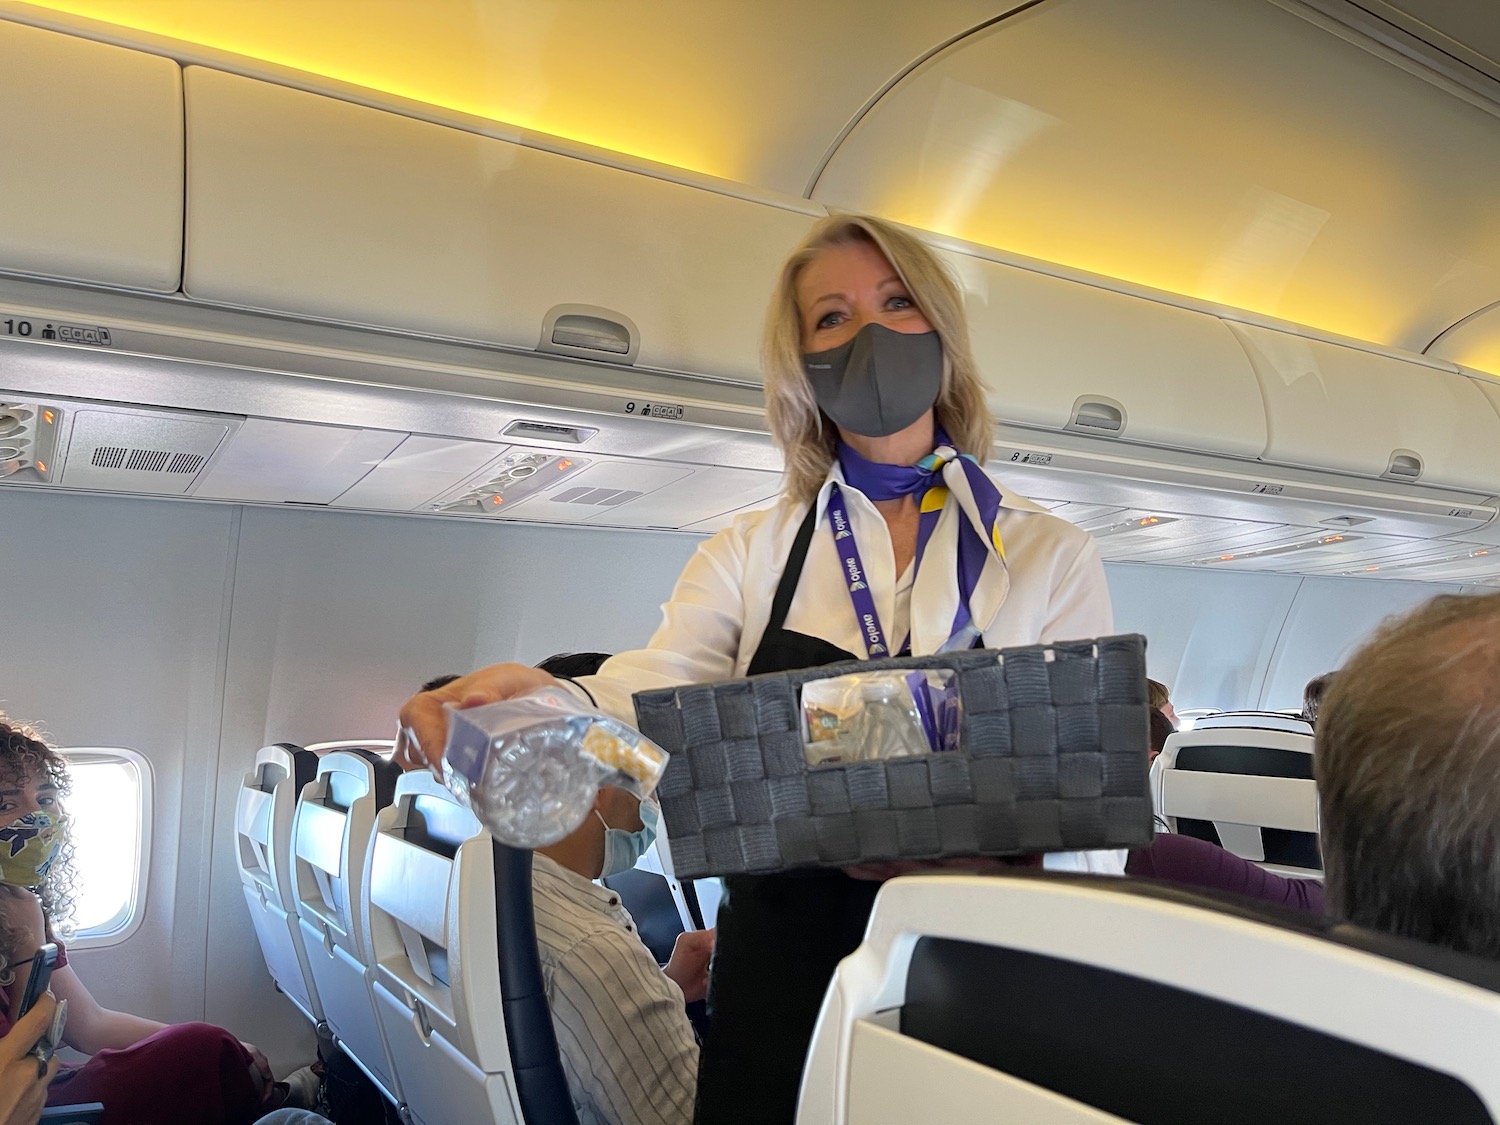 a woman wearing a face mask and holding a basket in an airplane